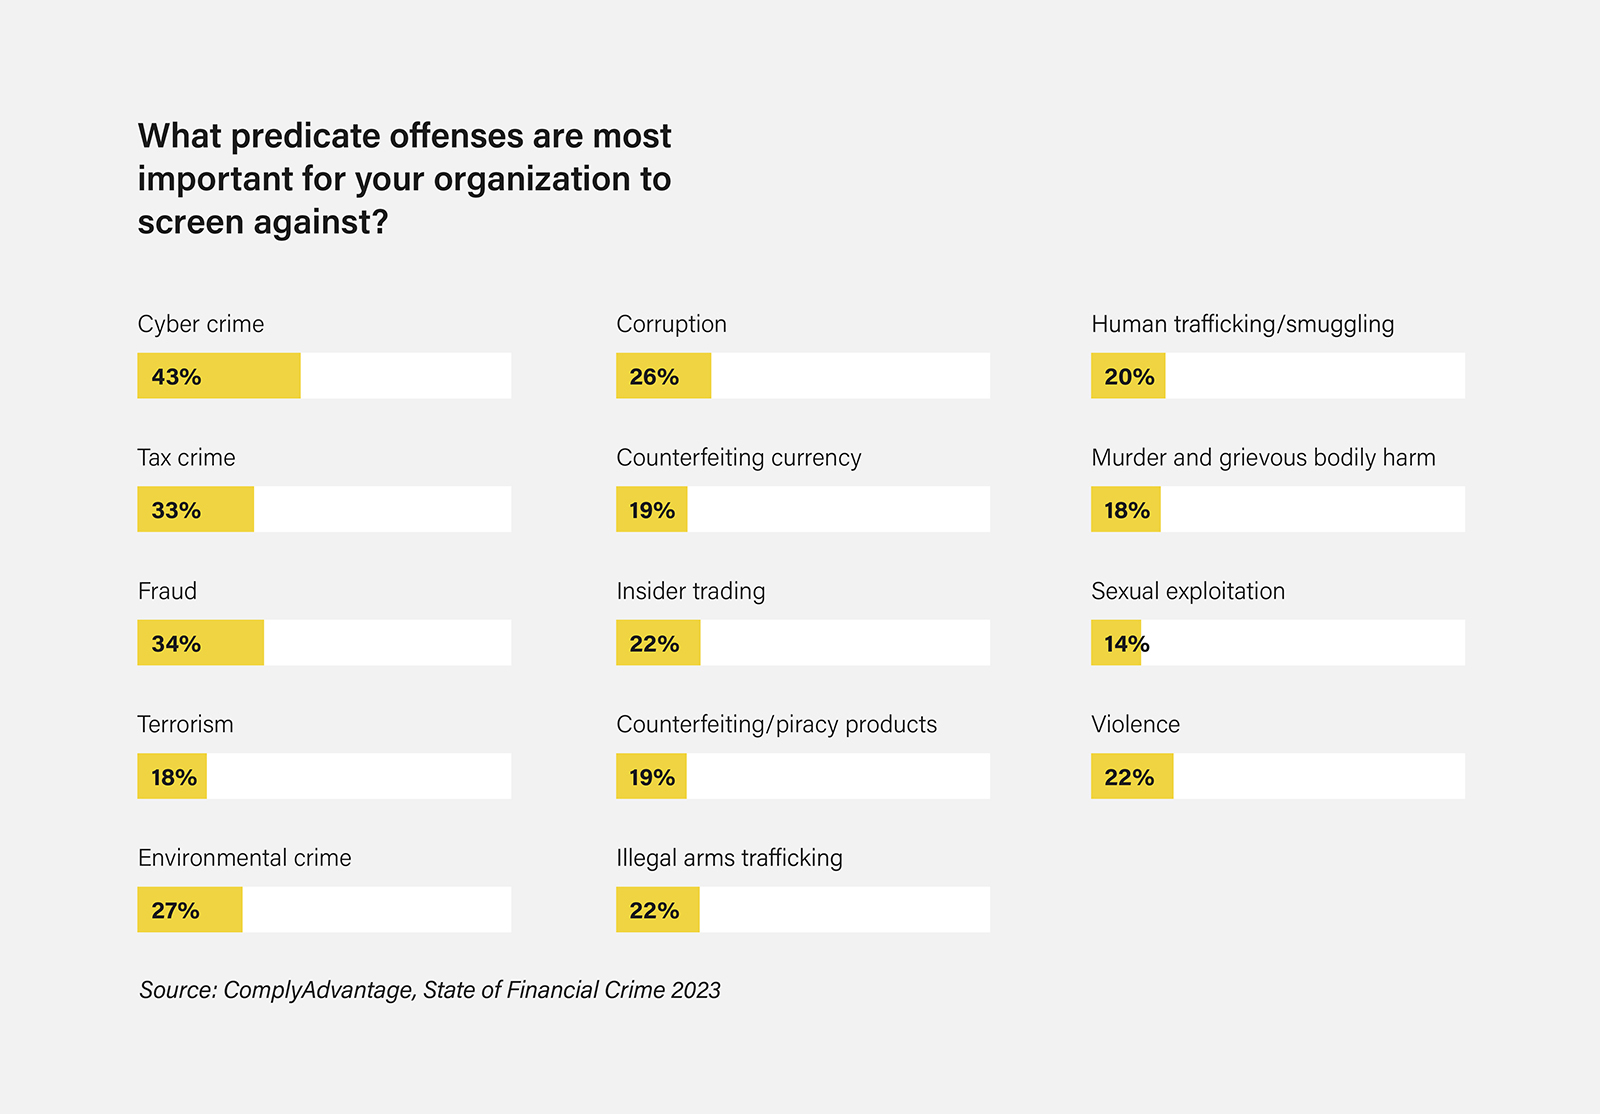 Cybercrime top predicate offence concern